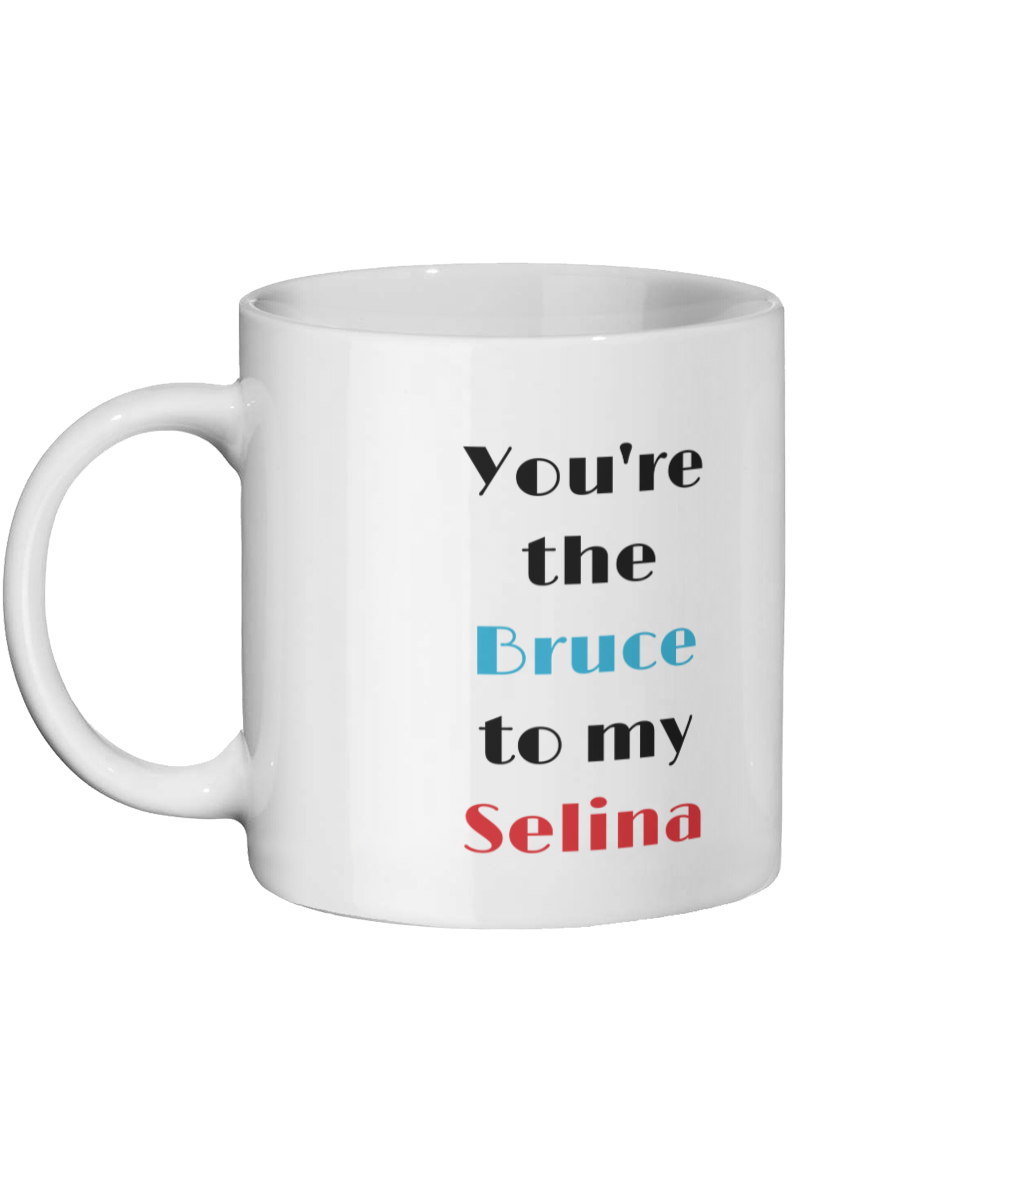 You’re the Bruce to my Selina Mug Left-side